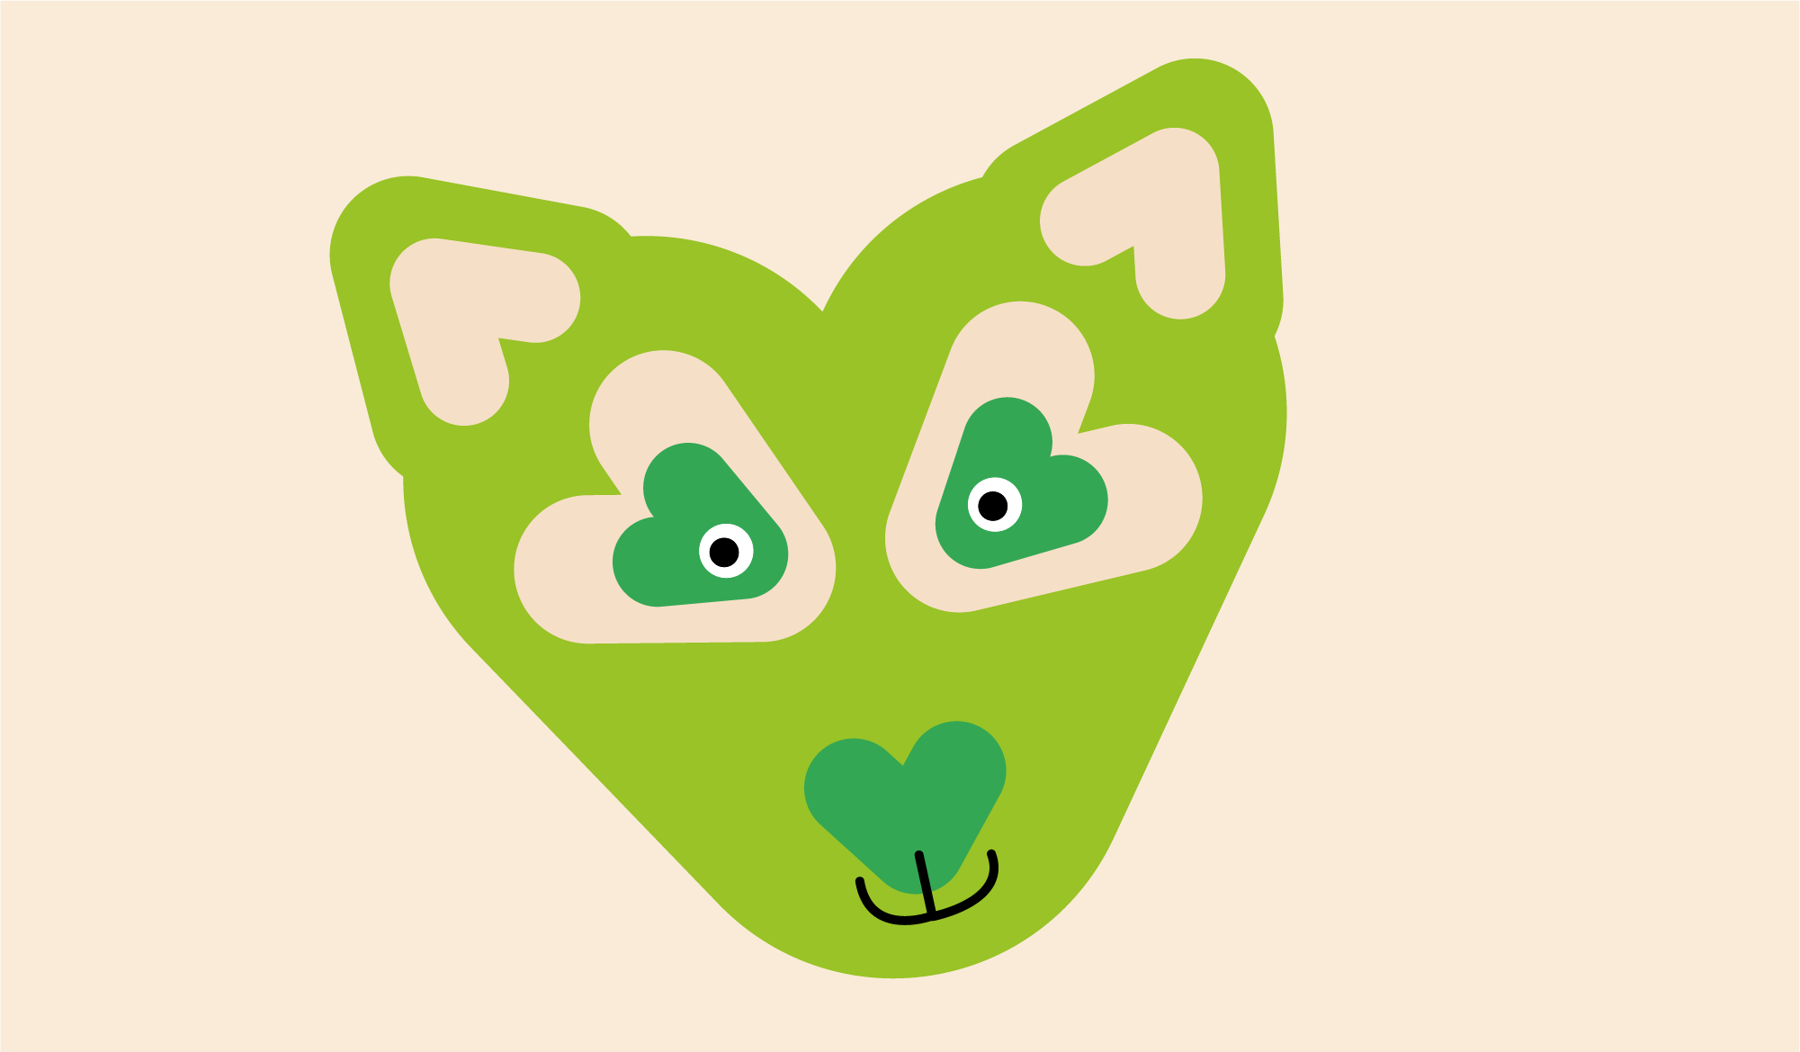 An image of a fox made of green heart shapes